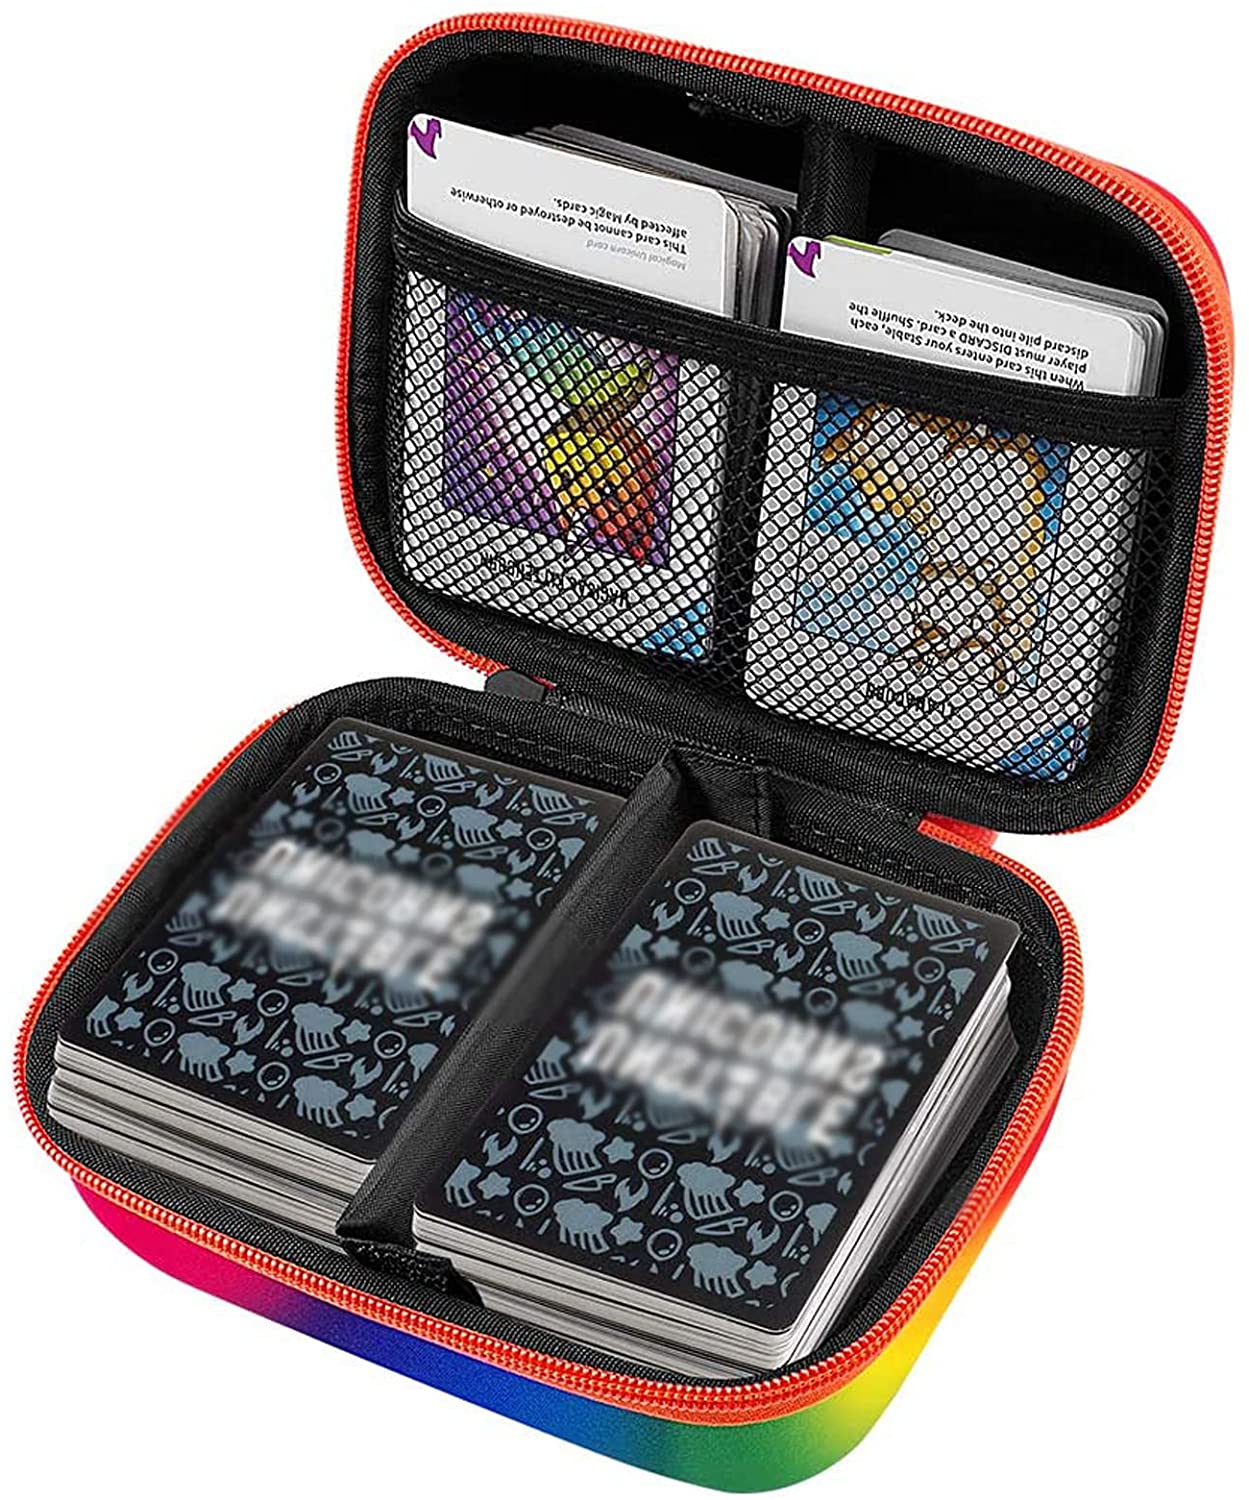 Case Compatible for Unstable Unicorns Card Game, for Legends/ for Dragons/ for NSFW/for Rainbow Apocalypse/for Adventures All Expansion Pack, Fits up to 400 Cards(Rainbow)